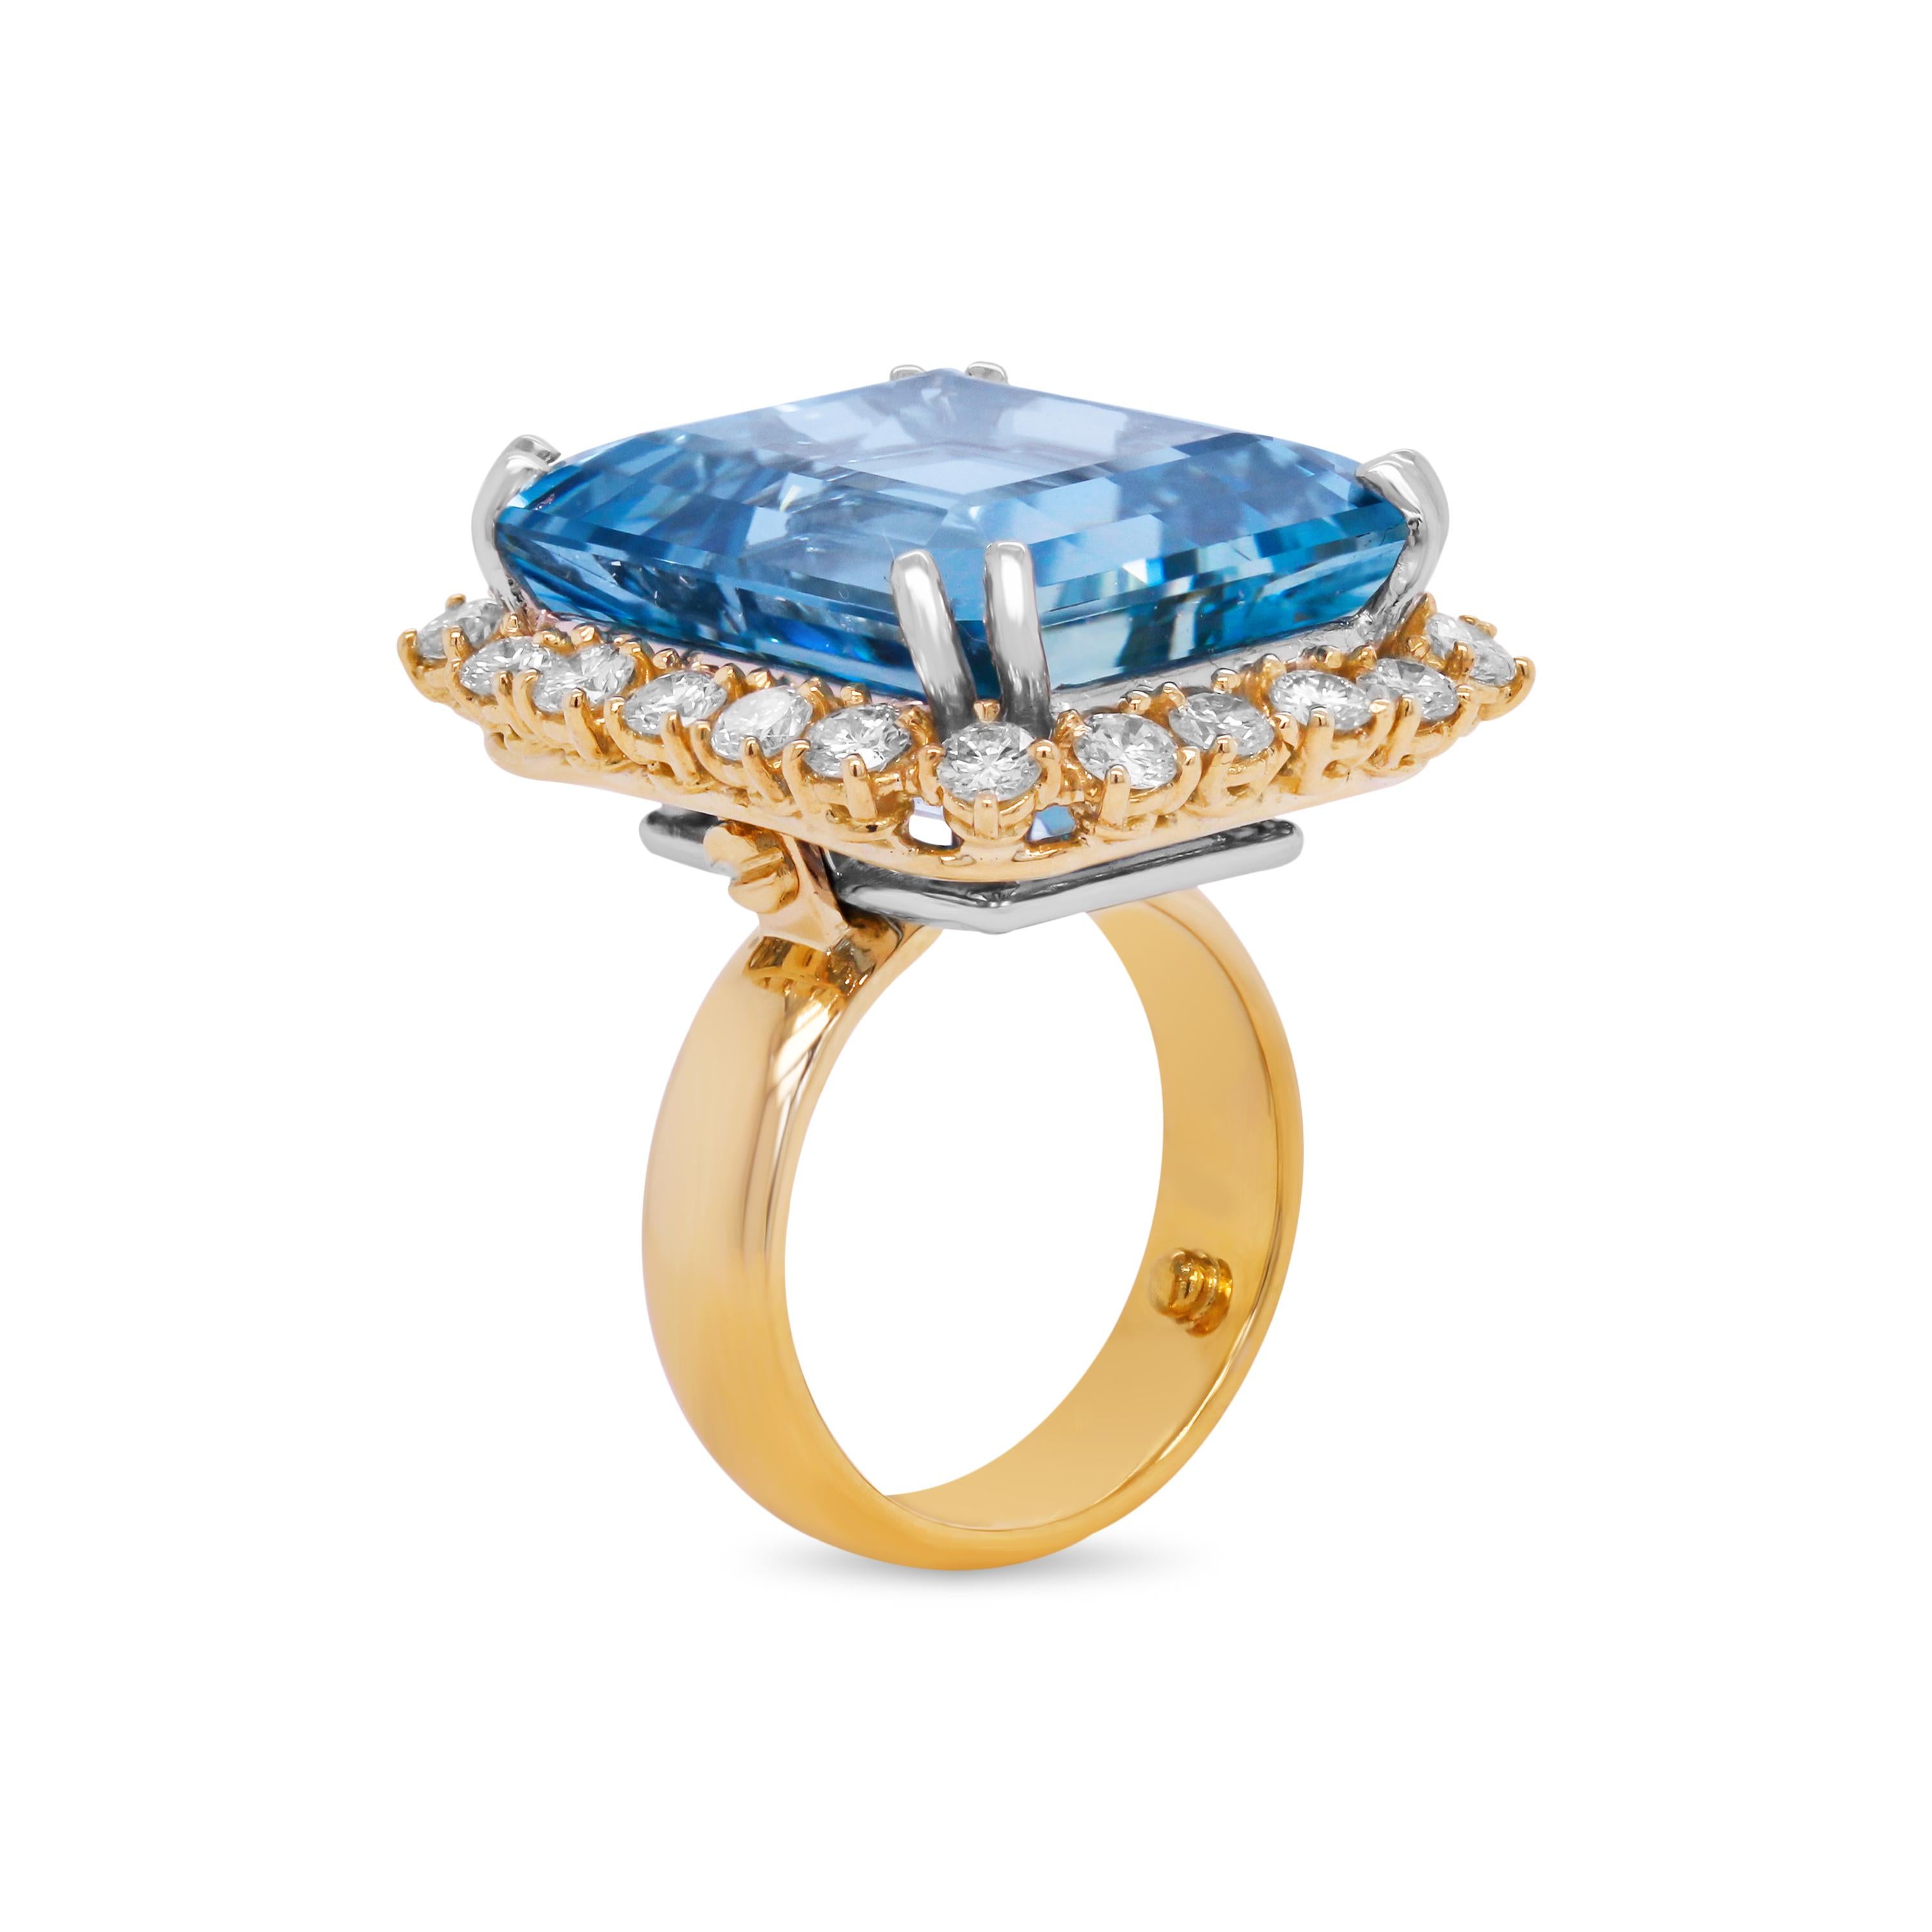 18K Yellow Gold Platinum Diamond 25 Carat Aquamarine Center Large Cocktail Ring

This one-of-a-kind ring features one of the most incredible Aquamarines we have laid our eyes in. At apprx. 25 carats, this is a large stone with lots of color and